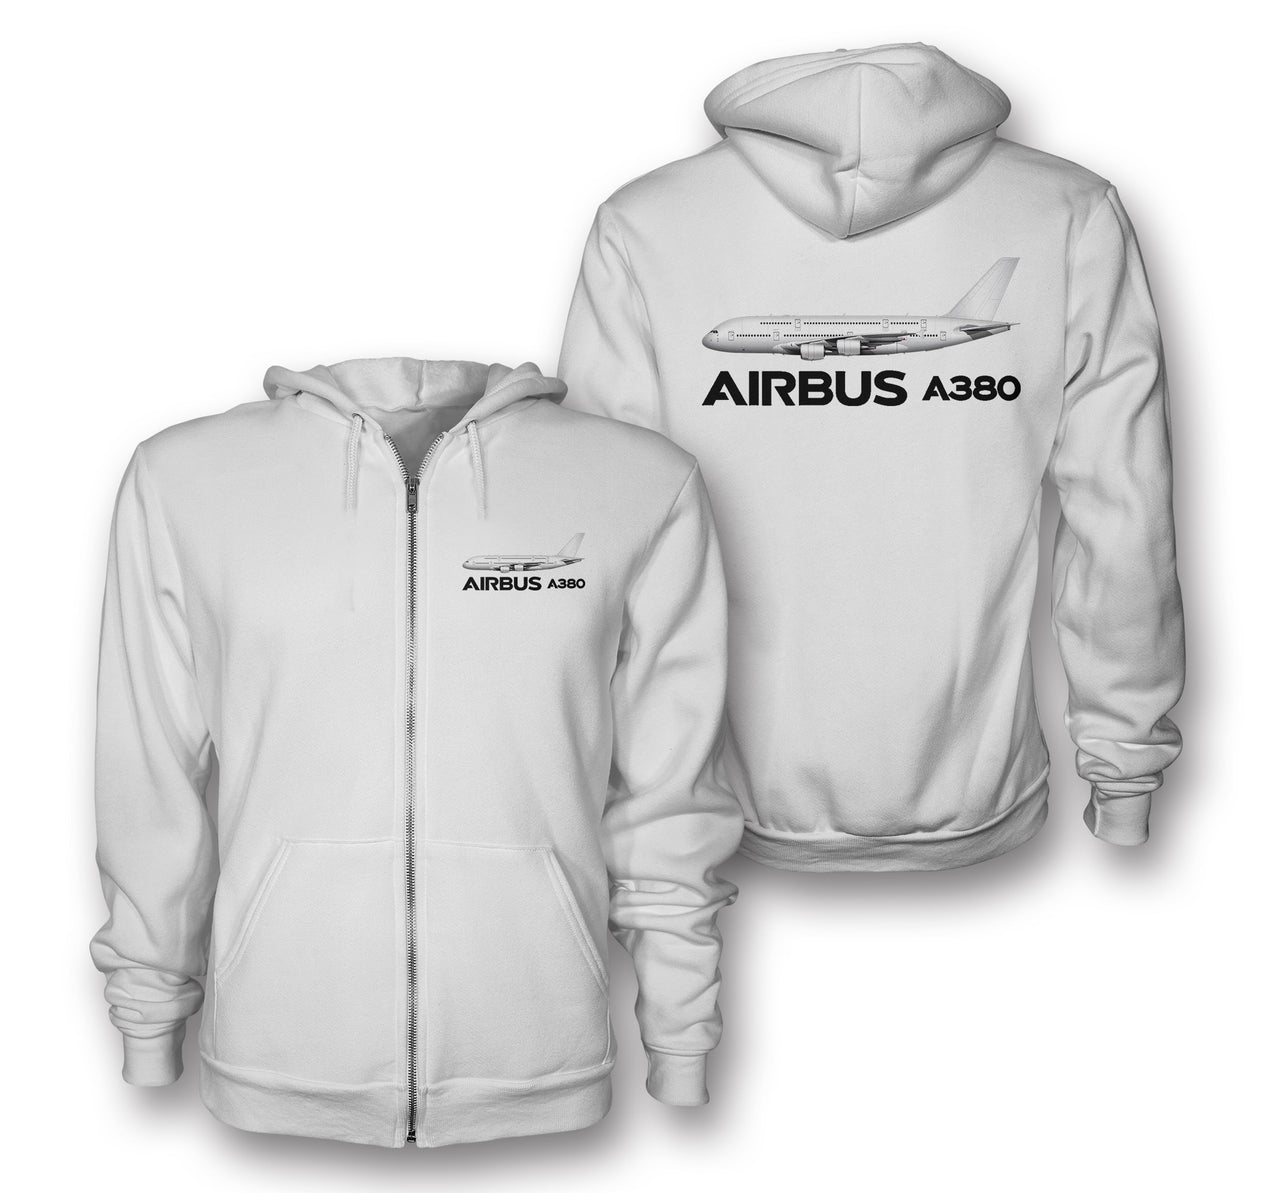 The Airbus A380 Designed Zipped Hoodies